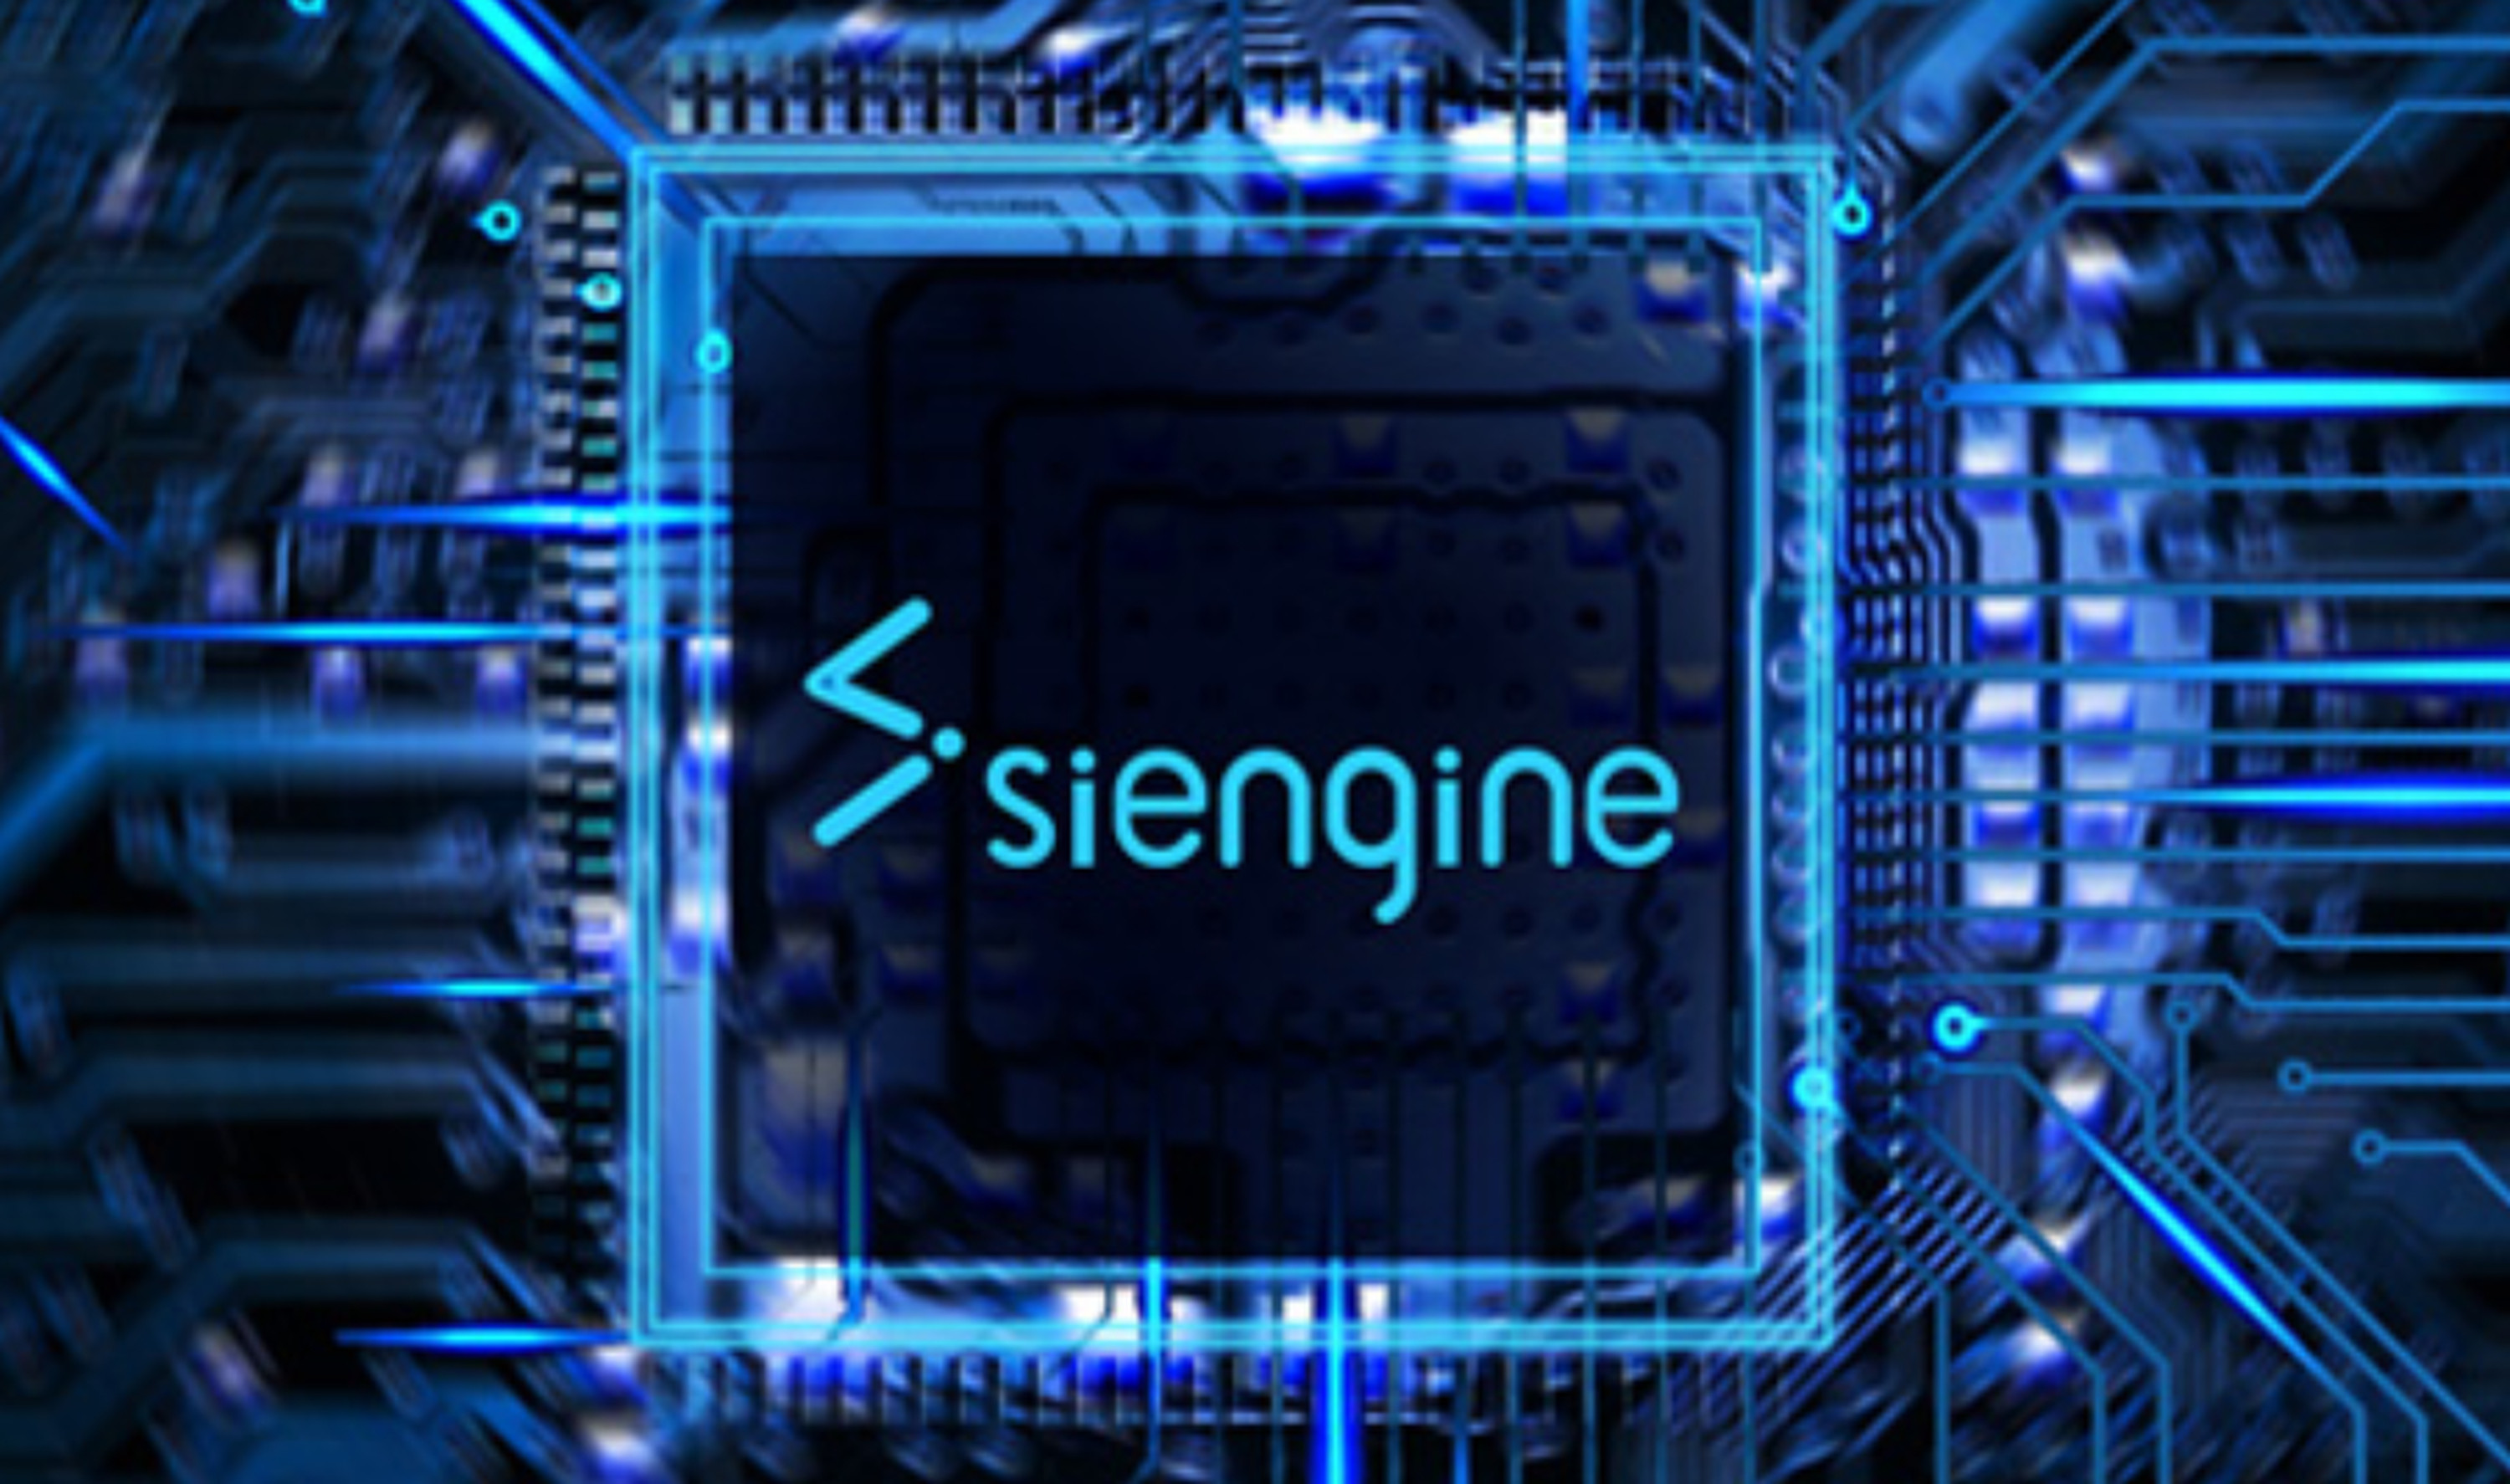 SiEngine Technology Co is focused on advanced automotive system-on-a-chip designs. Photo: Handout